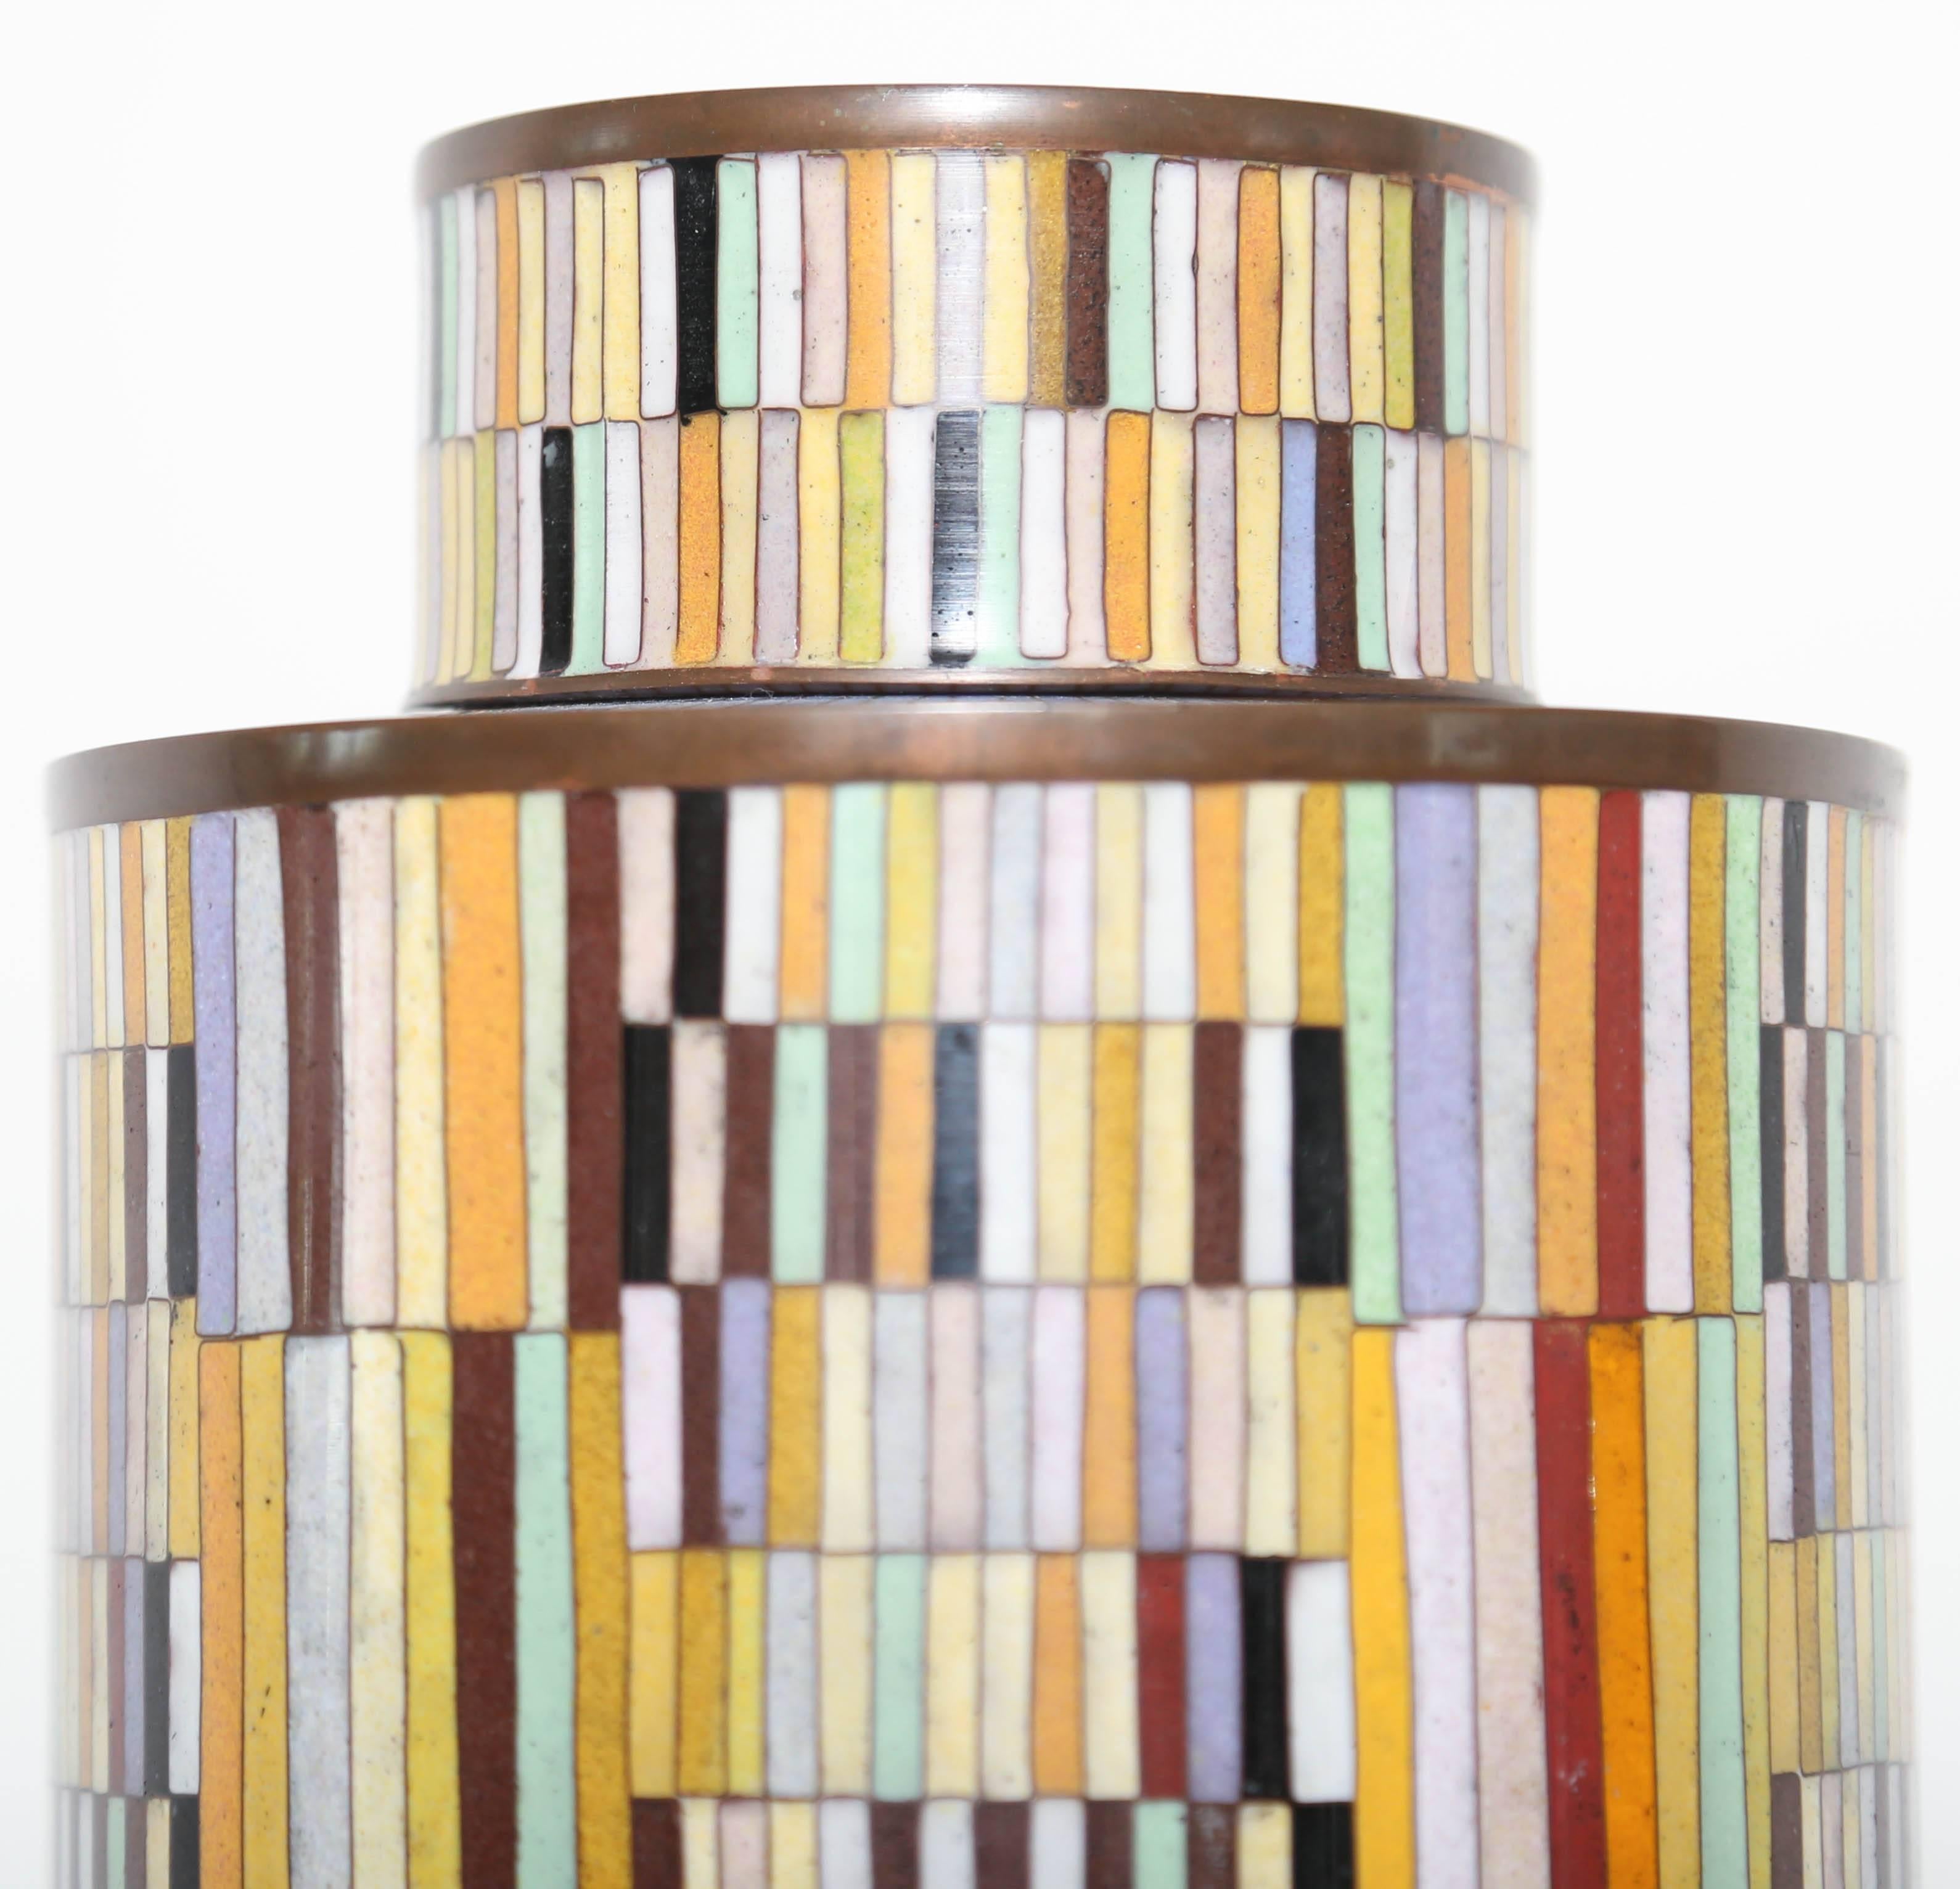 Very colorful cloisonné lidded canister by Fabienne Jouvin.